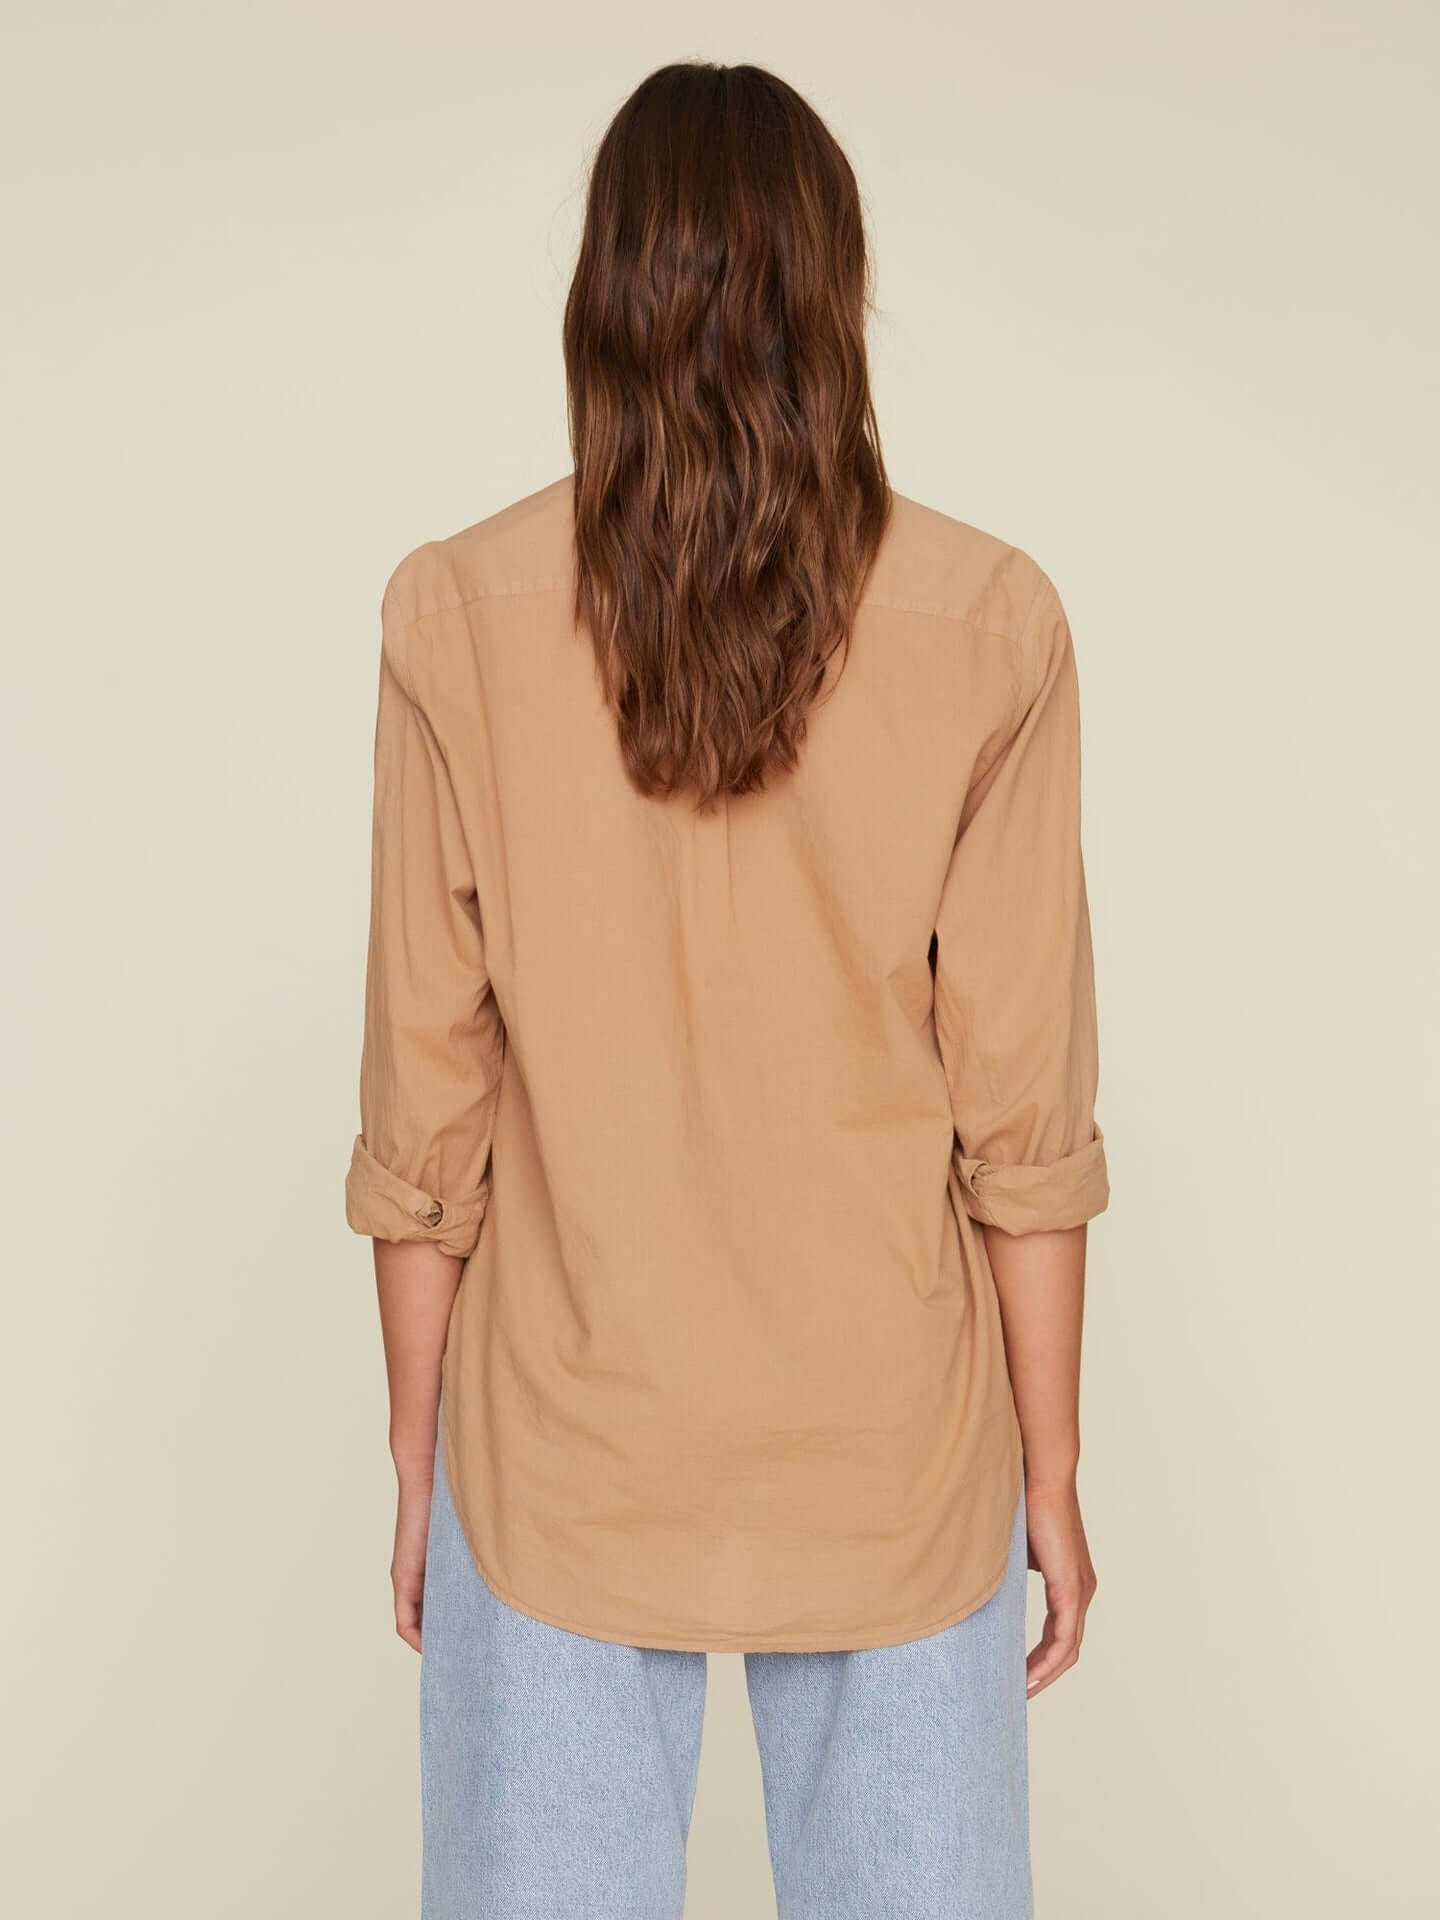 Xírena Beau Shirt in Hazelnut available at TNT The New Trend Australia. Free shipping on orders over $300 AUD.